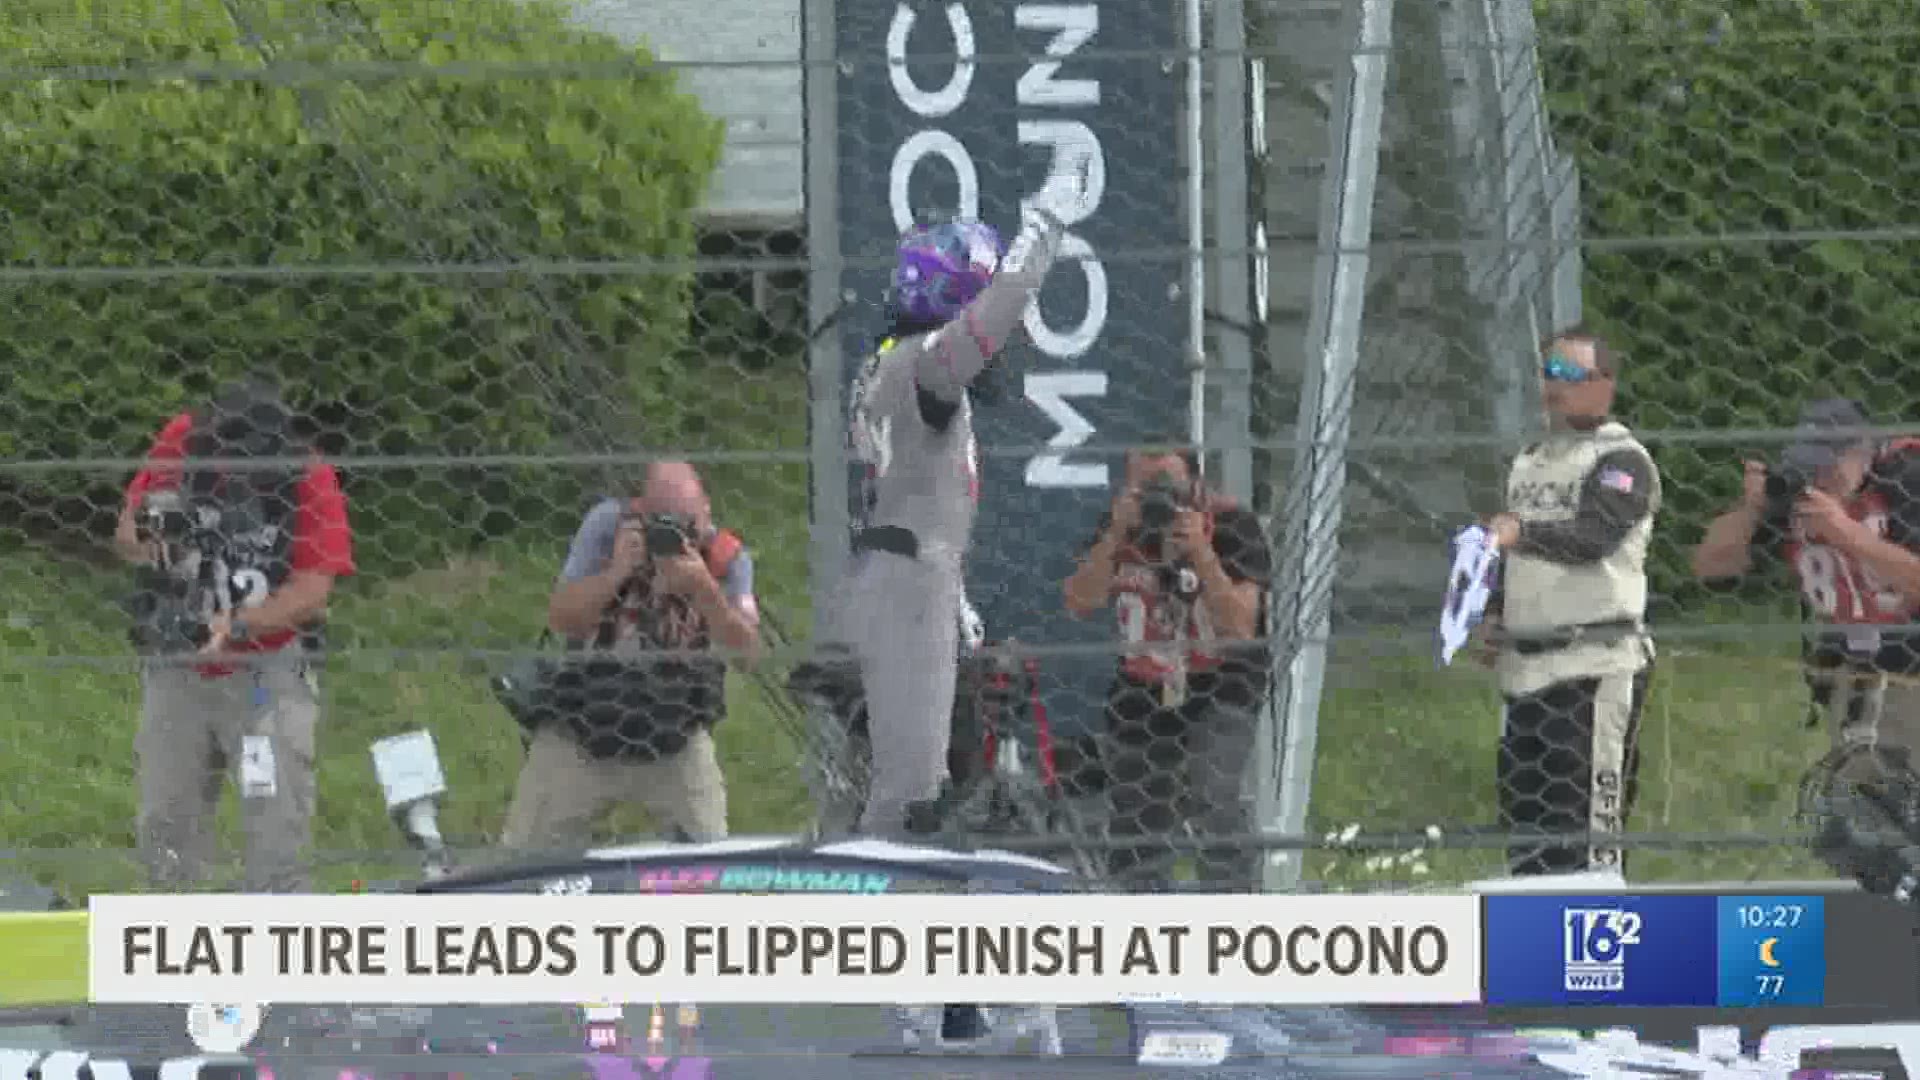 Kyle Larson had the lead late at Pocono but cut a tire on the final lap